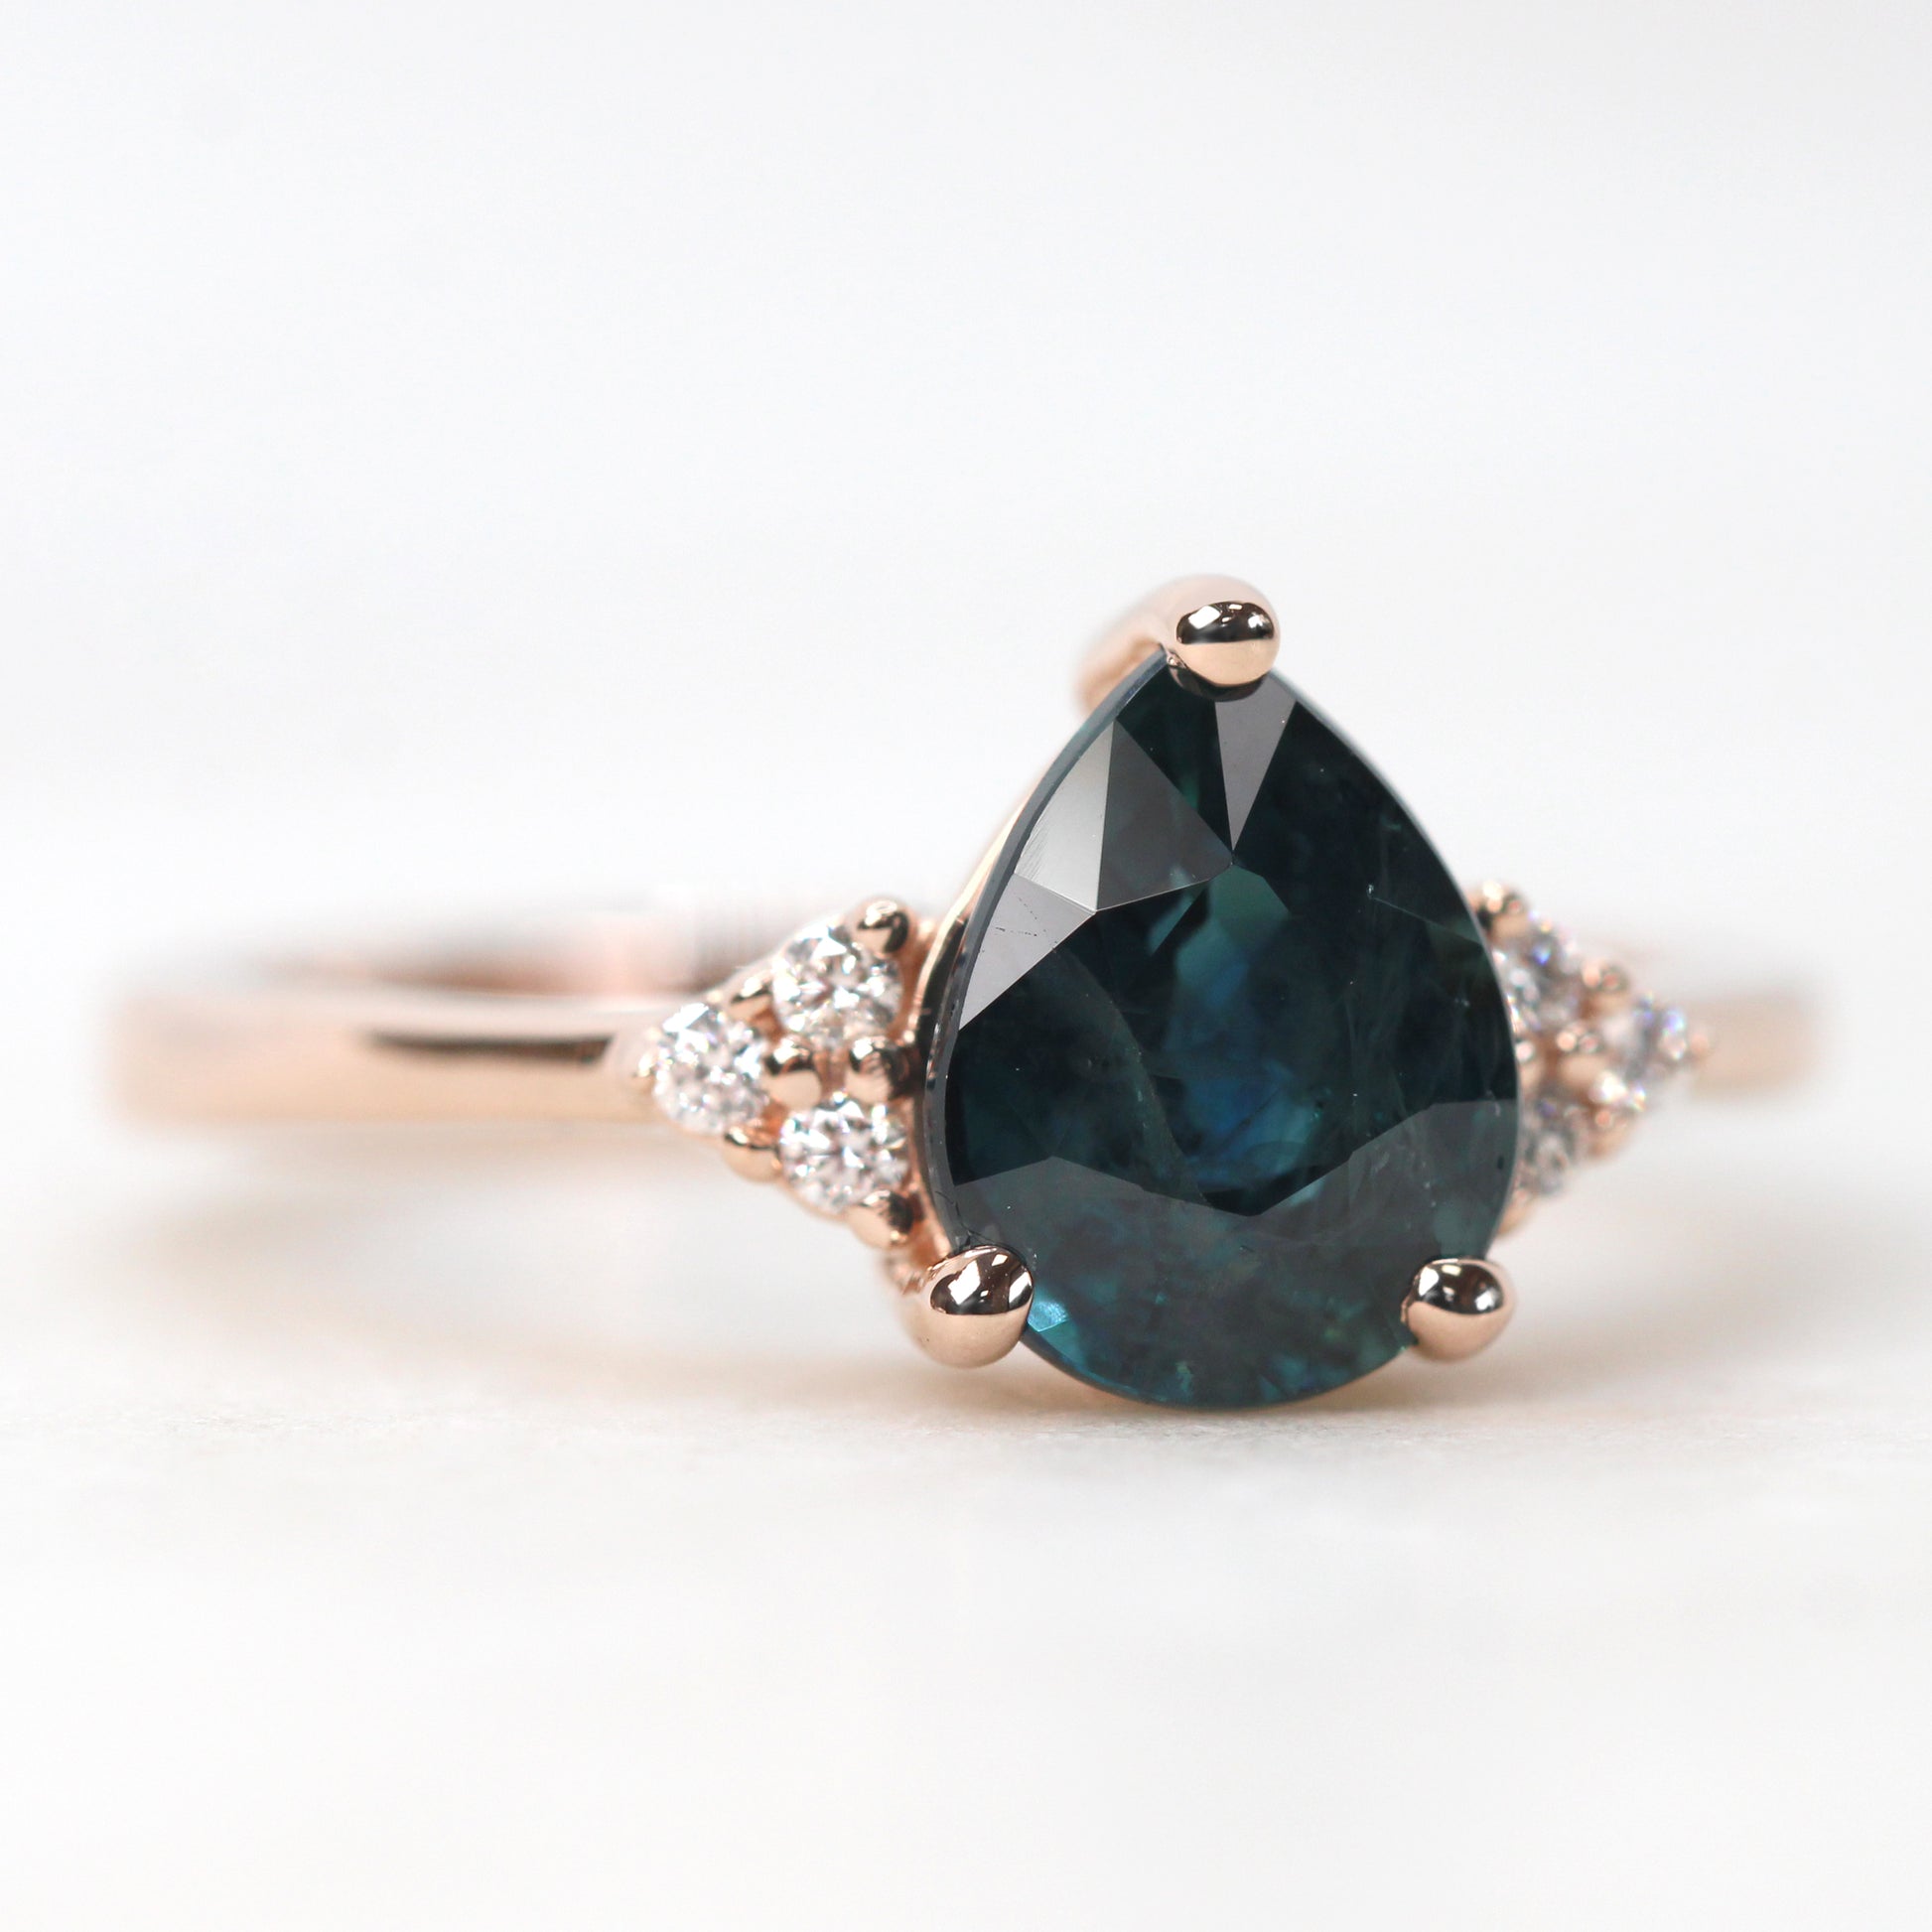 Imogene Ring with a 2.31 Carat Pear Teal Blue Sapphire and White Accent Diamonds in 14k Rose Gold - Ready to Size and Ship - Midwinter Co. Alternative Bridal Rings and Modern Fine Jewelry